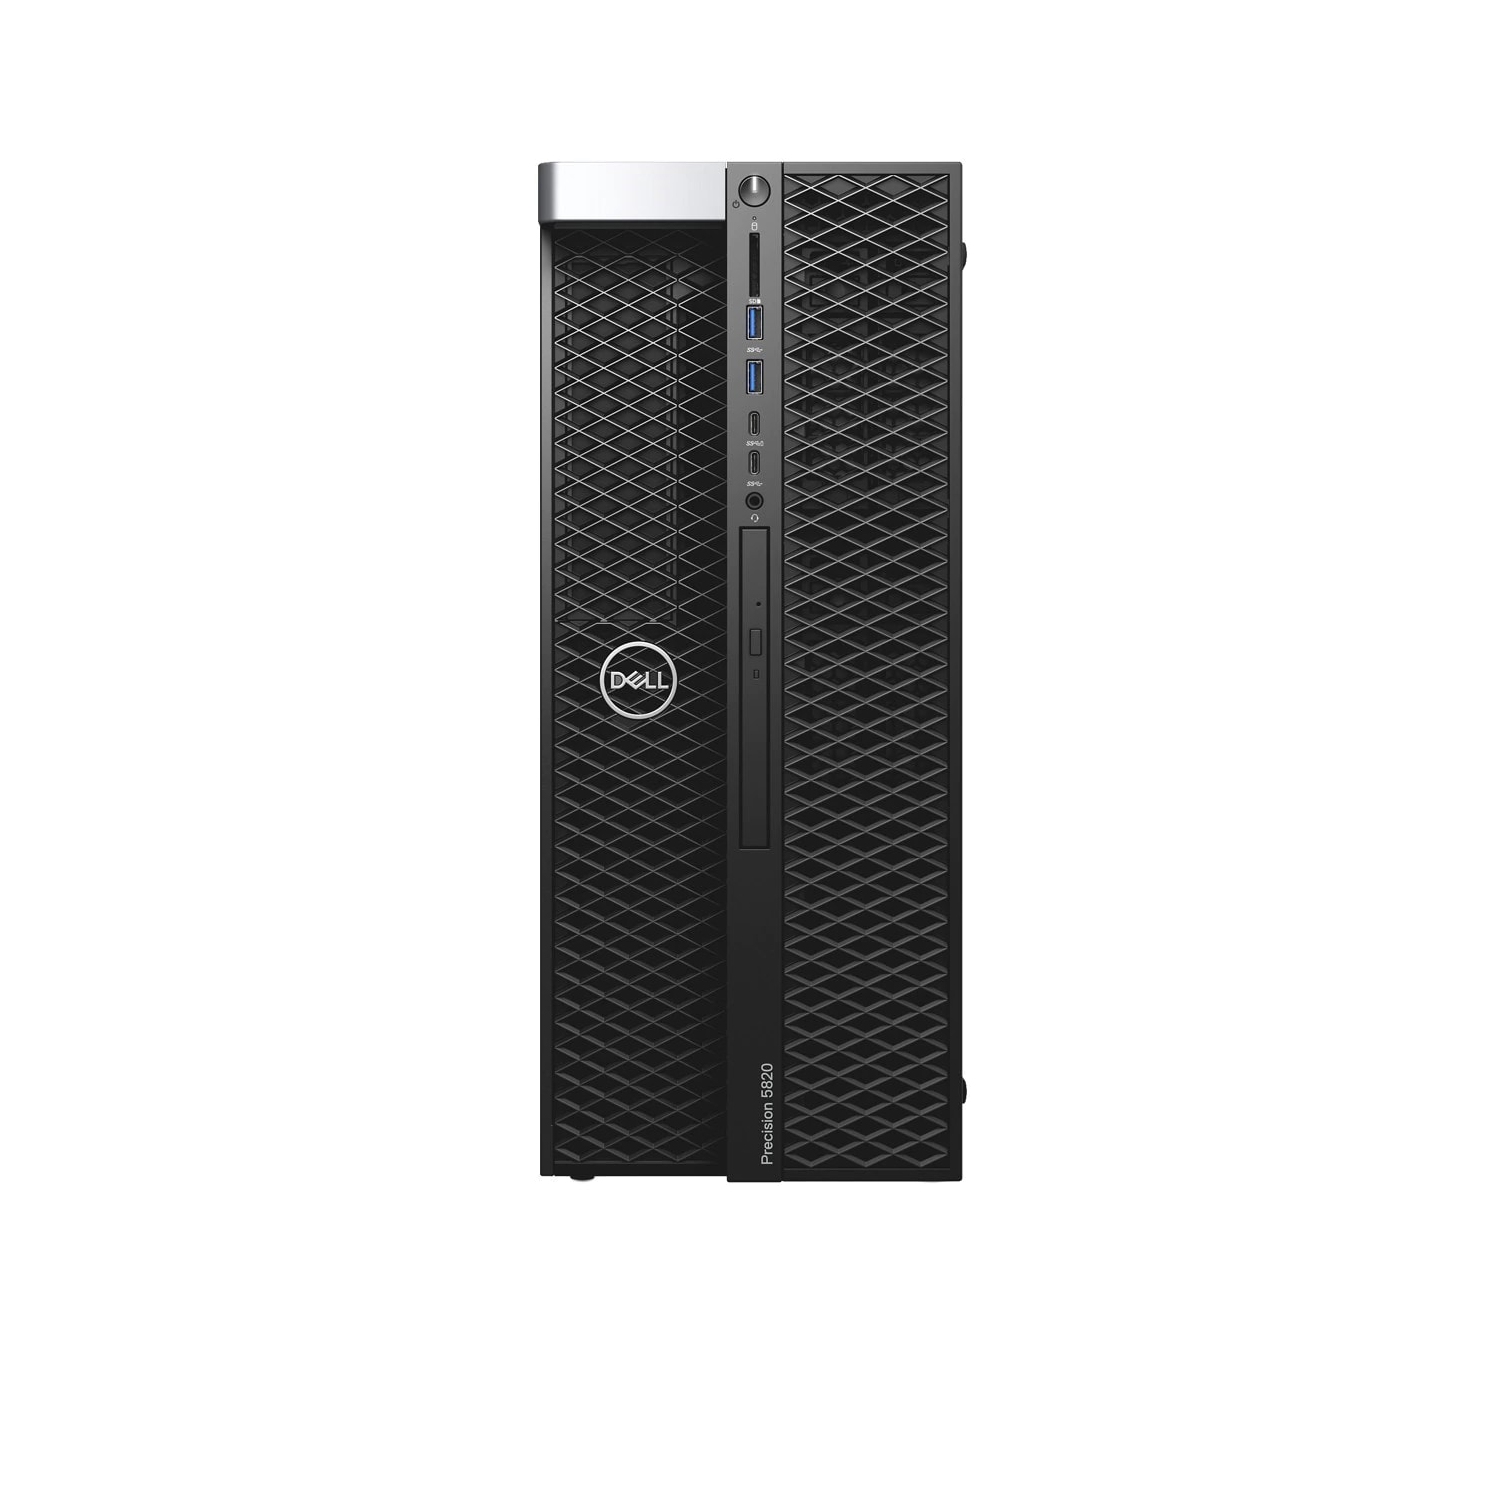 Refurbished (Excellent) - Dell Precision T5820 Workstation Desktop (2018), Core i9, 2TB HDD, 64GB RAM, RTX 5000, 10 Cores @ 4.5 GHz, 10th Gen CPU Certified Refurbished